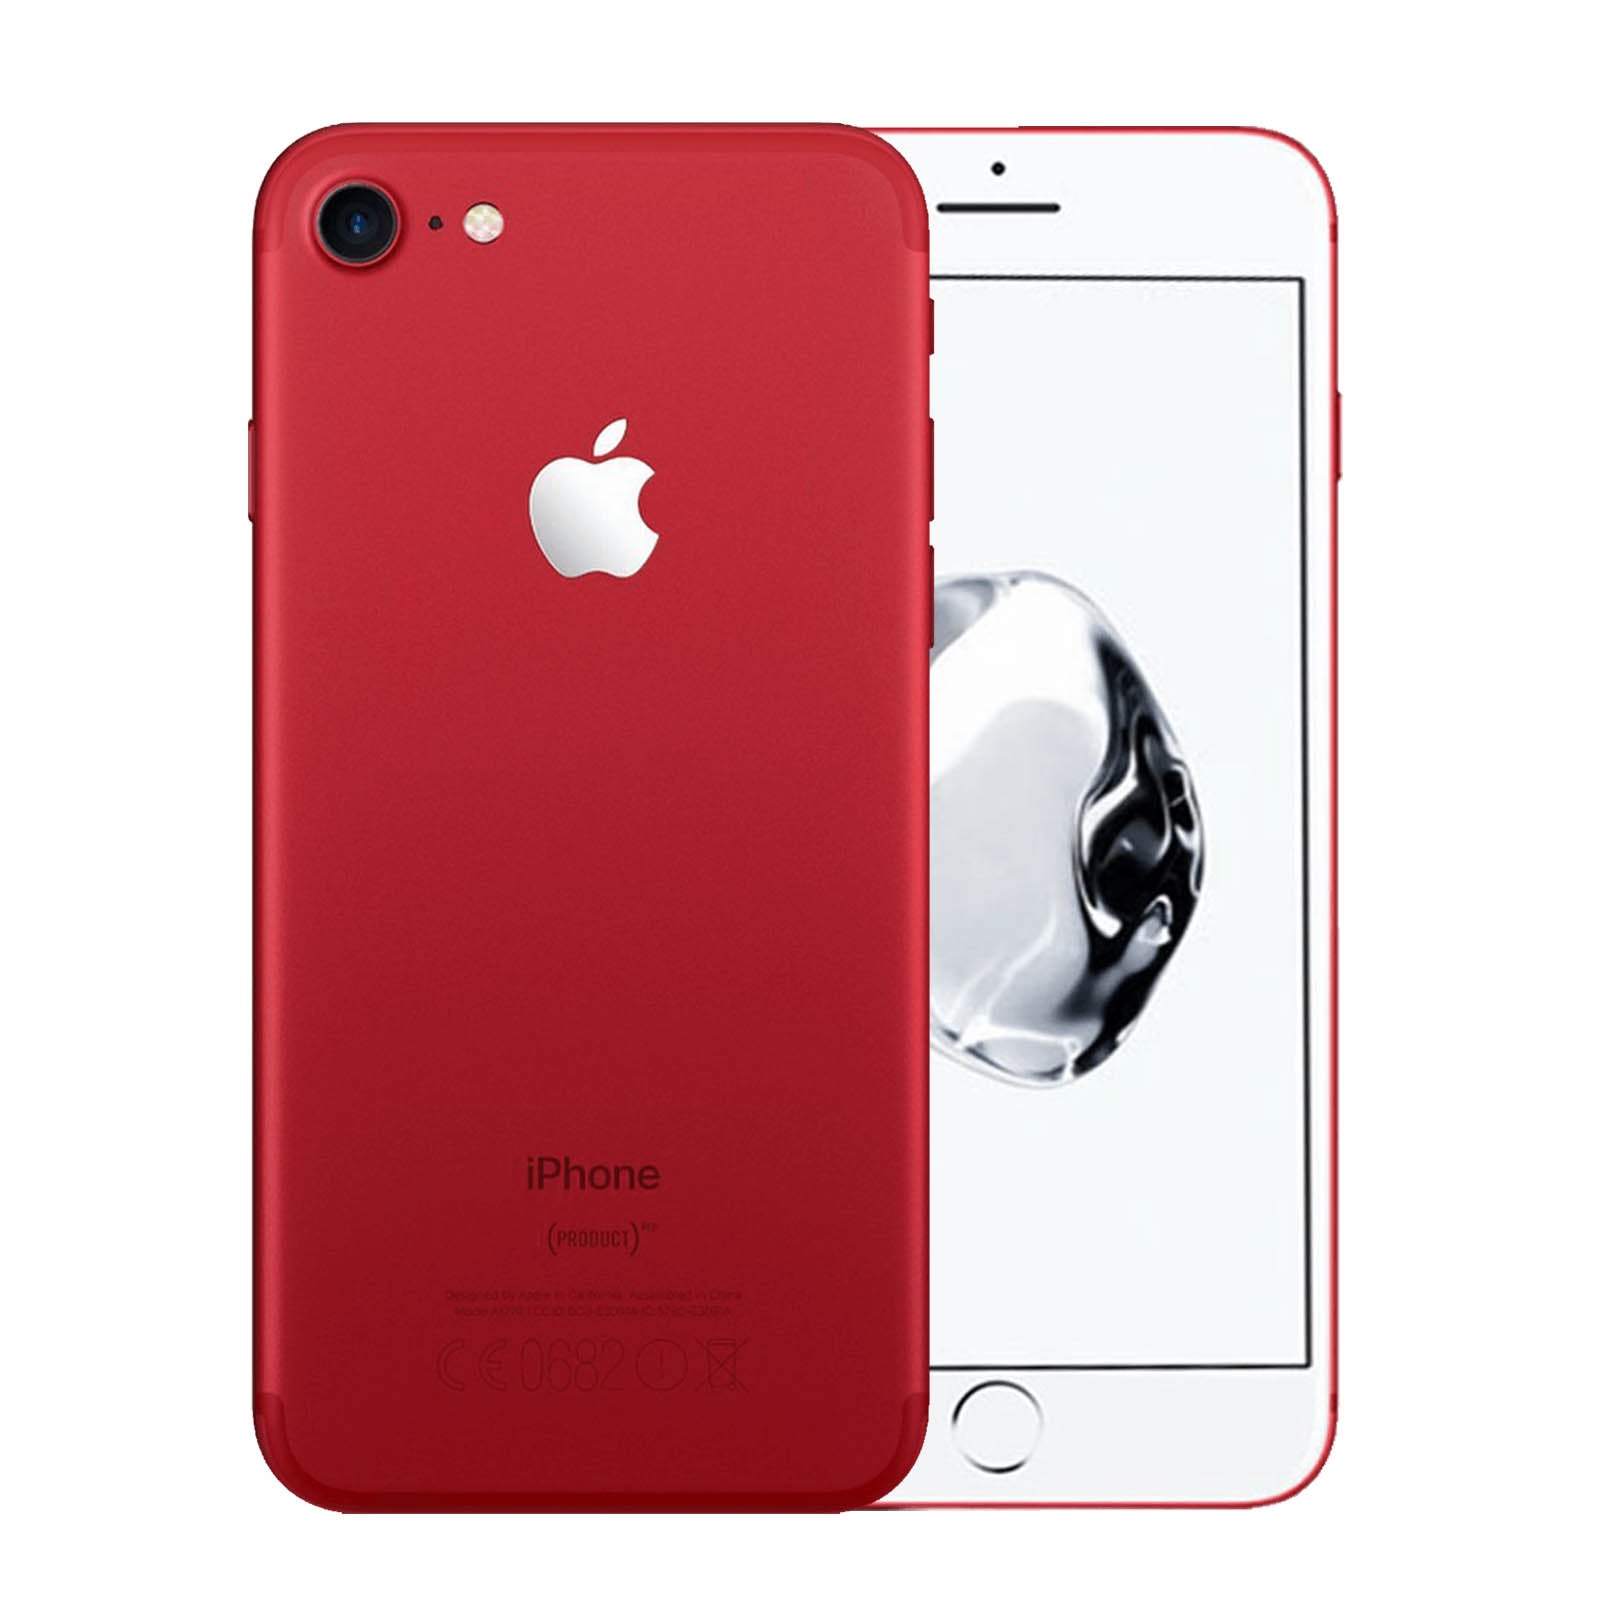 Apple iPhone 7 256GB Product Product Red Makellos - Ohne Vertrag